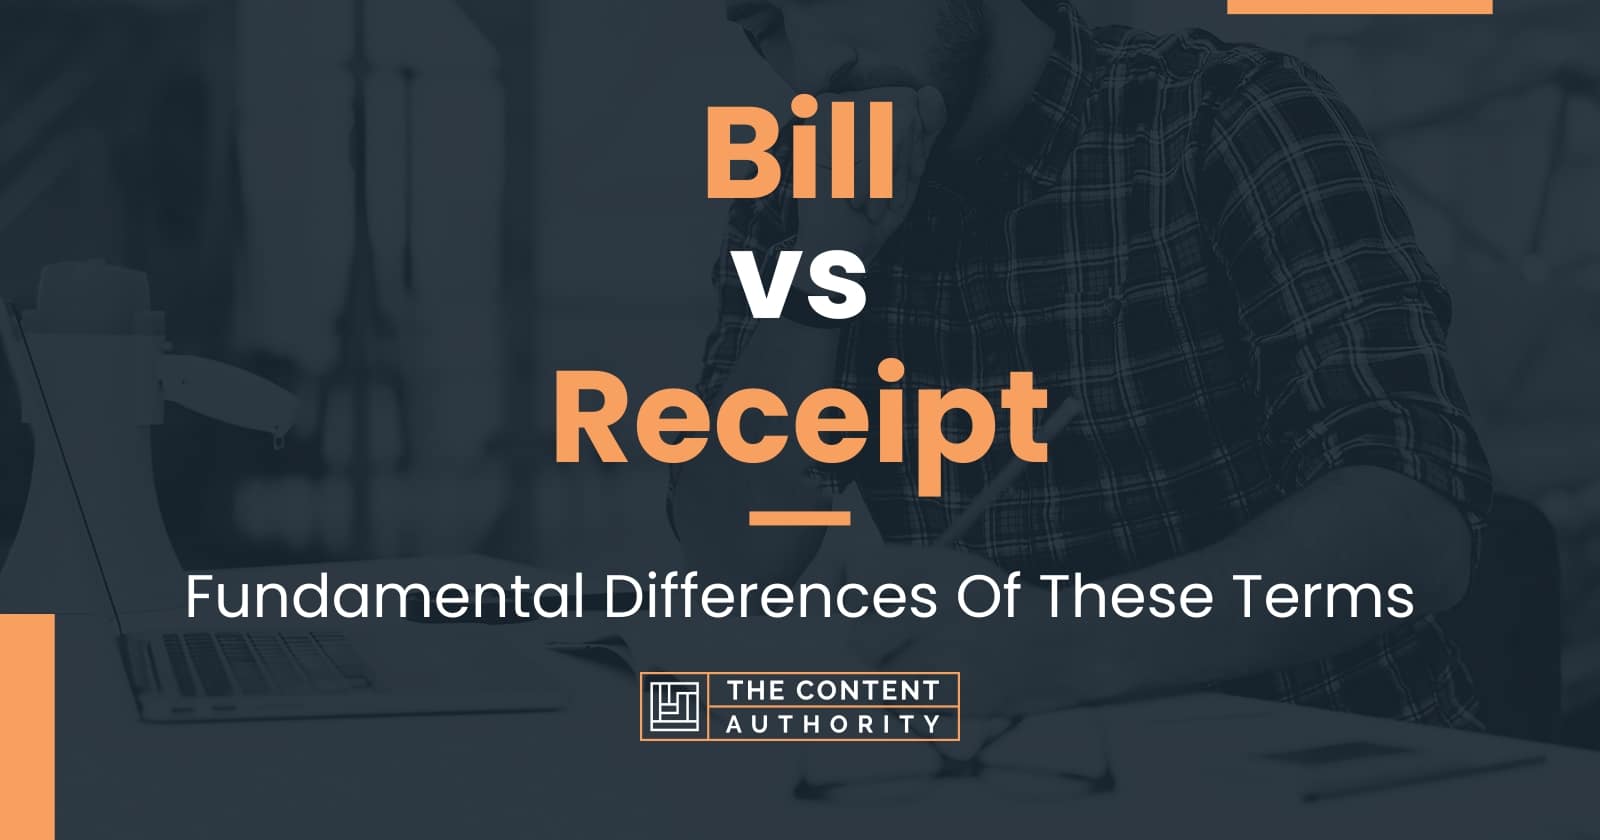 bill-vs-receipt-fundamental-differences-of-these-terms